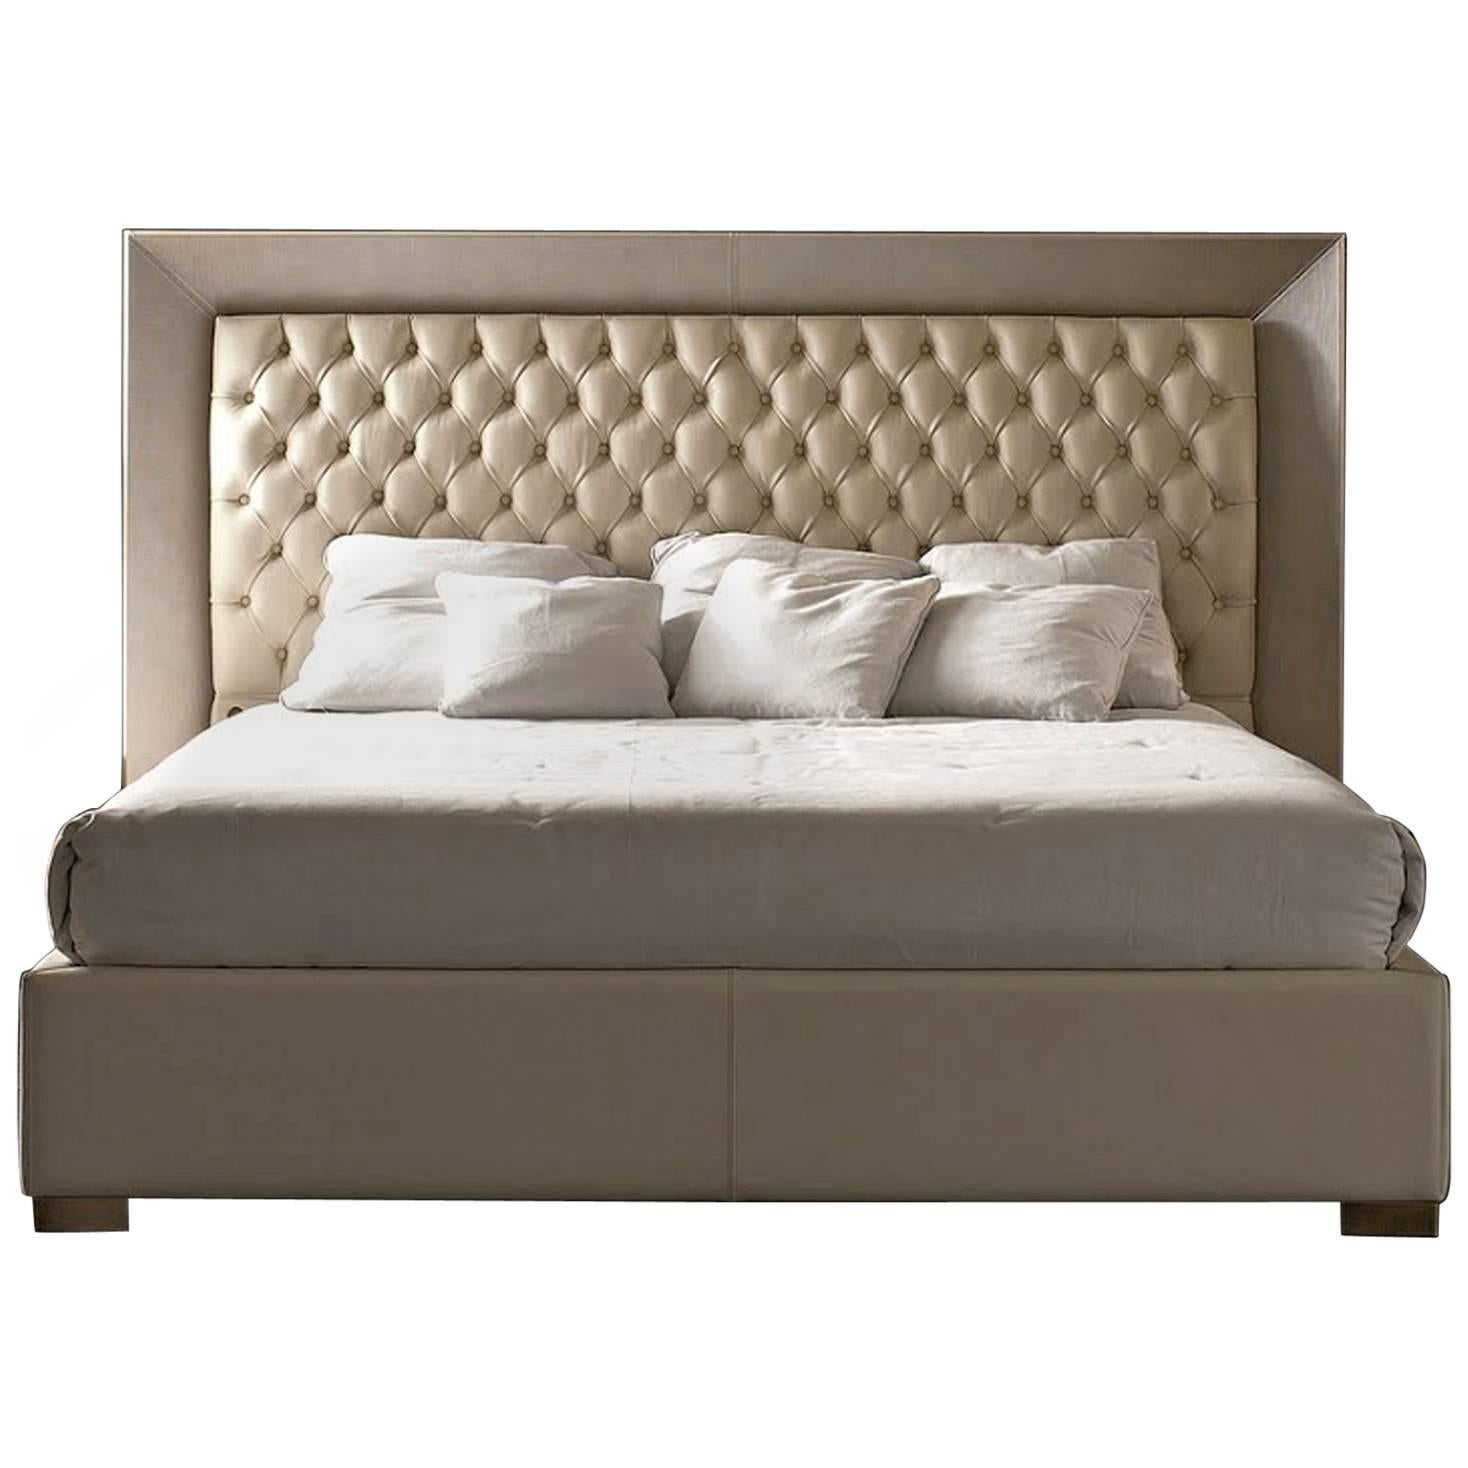 Kany Bed with Headboard and Frame in Leather 